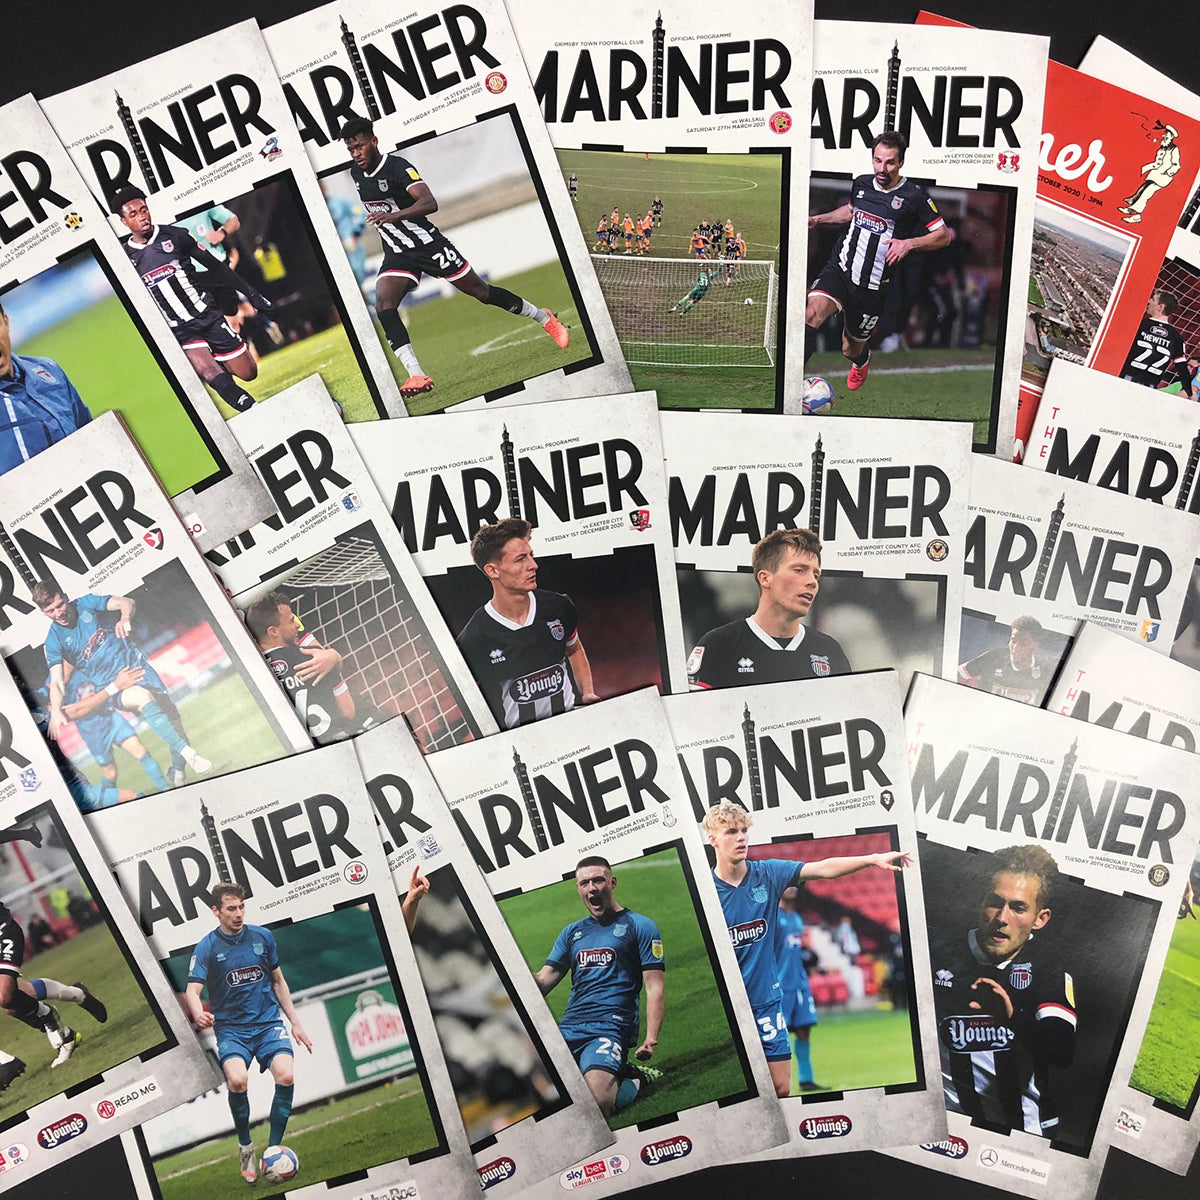 Grimsby Town FC The Mariner Printed Programme 2020-21 Season